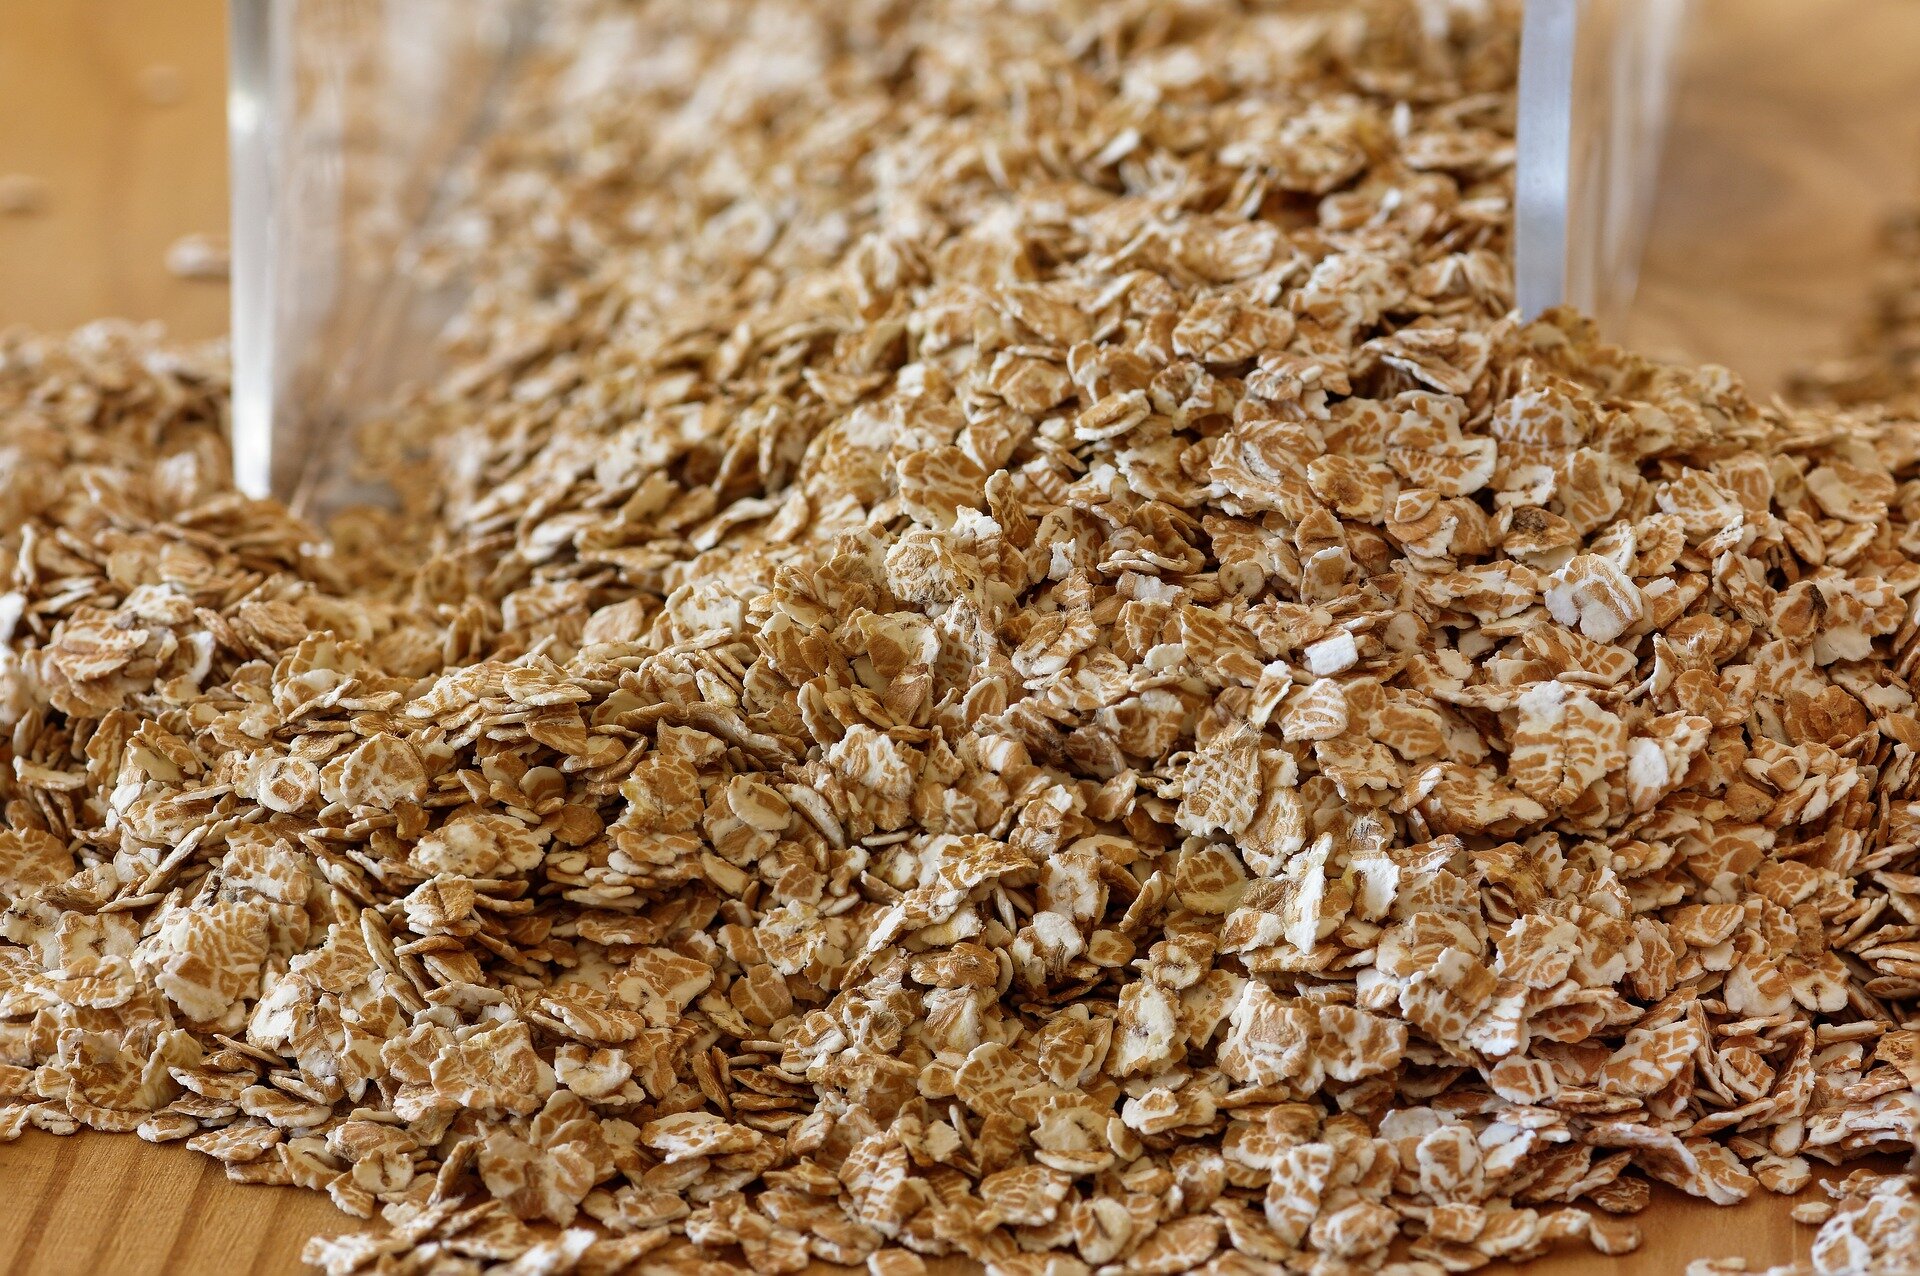 Are Americans eating enough whole grains? It depends on who you ask